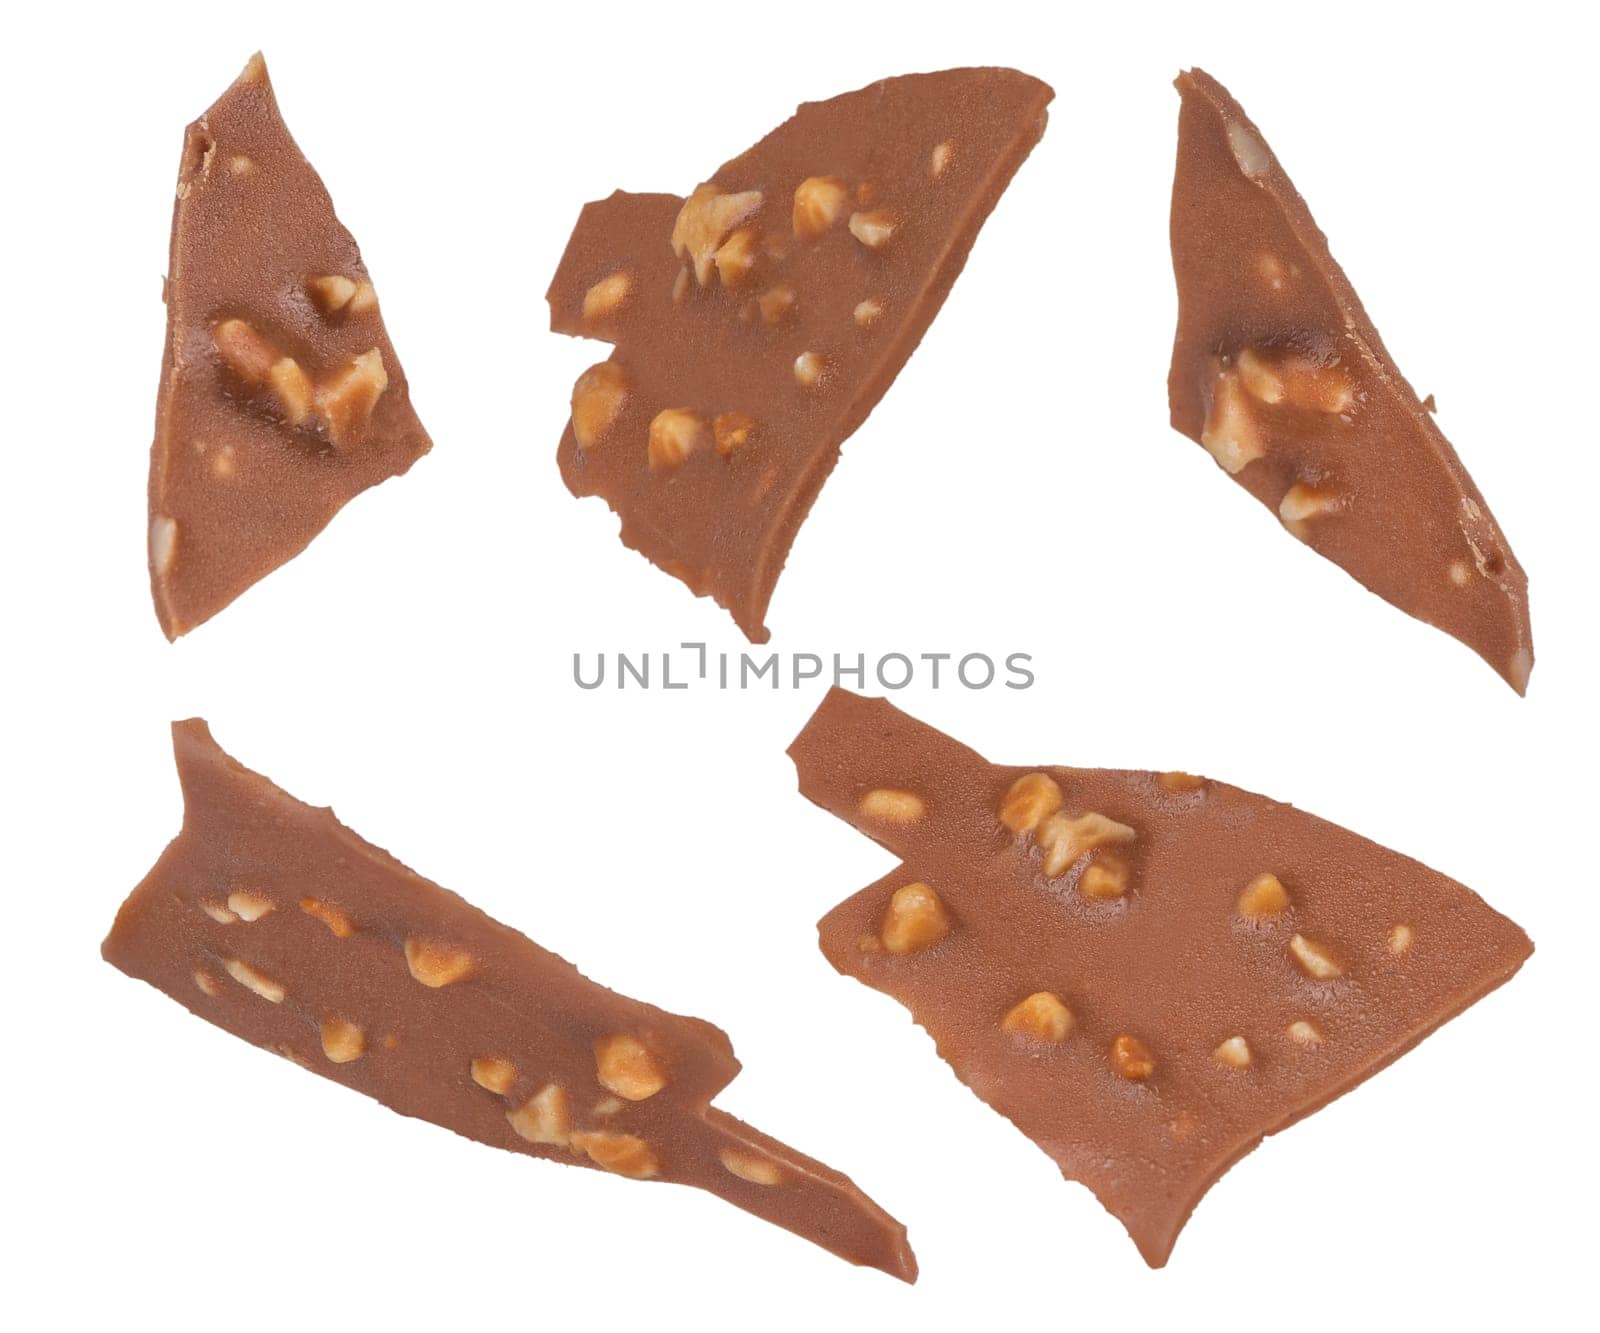 Chocolate pieces of ice cream in glaze with nuts. Pieces of chocolate on a white isolated background. Suitable for pasting into a design or project